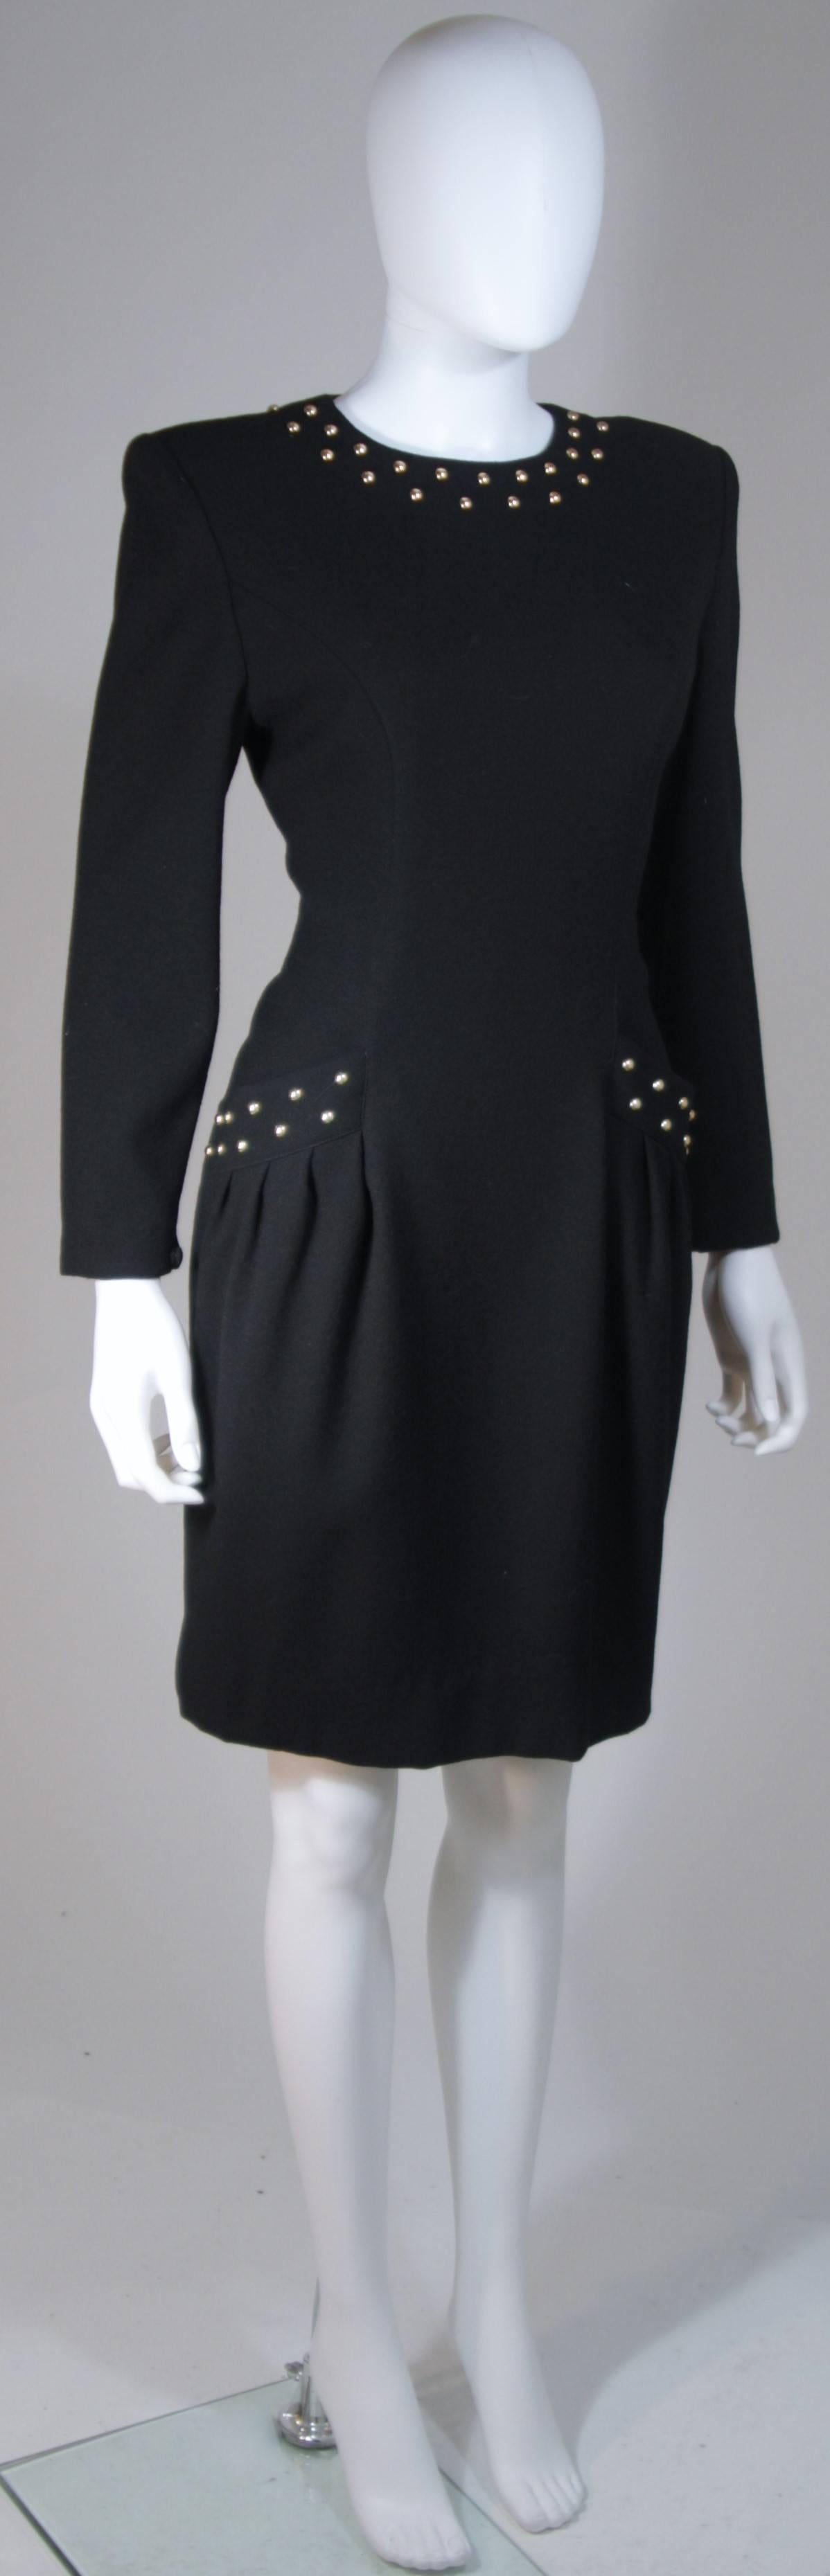 GUY LAROCHE Black Cocktail Dress with Stud Applique Size Large In Excellent Condition For Sale In Los Angeles, CA